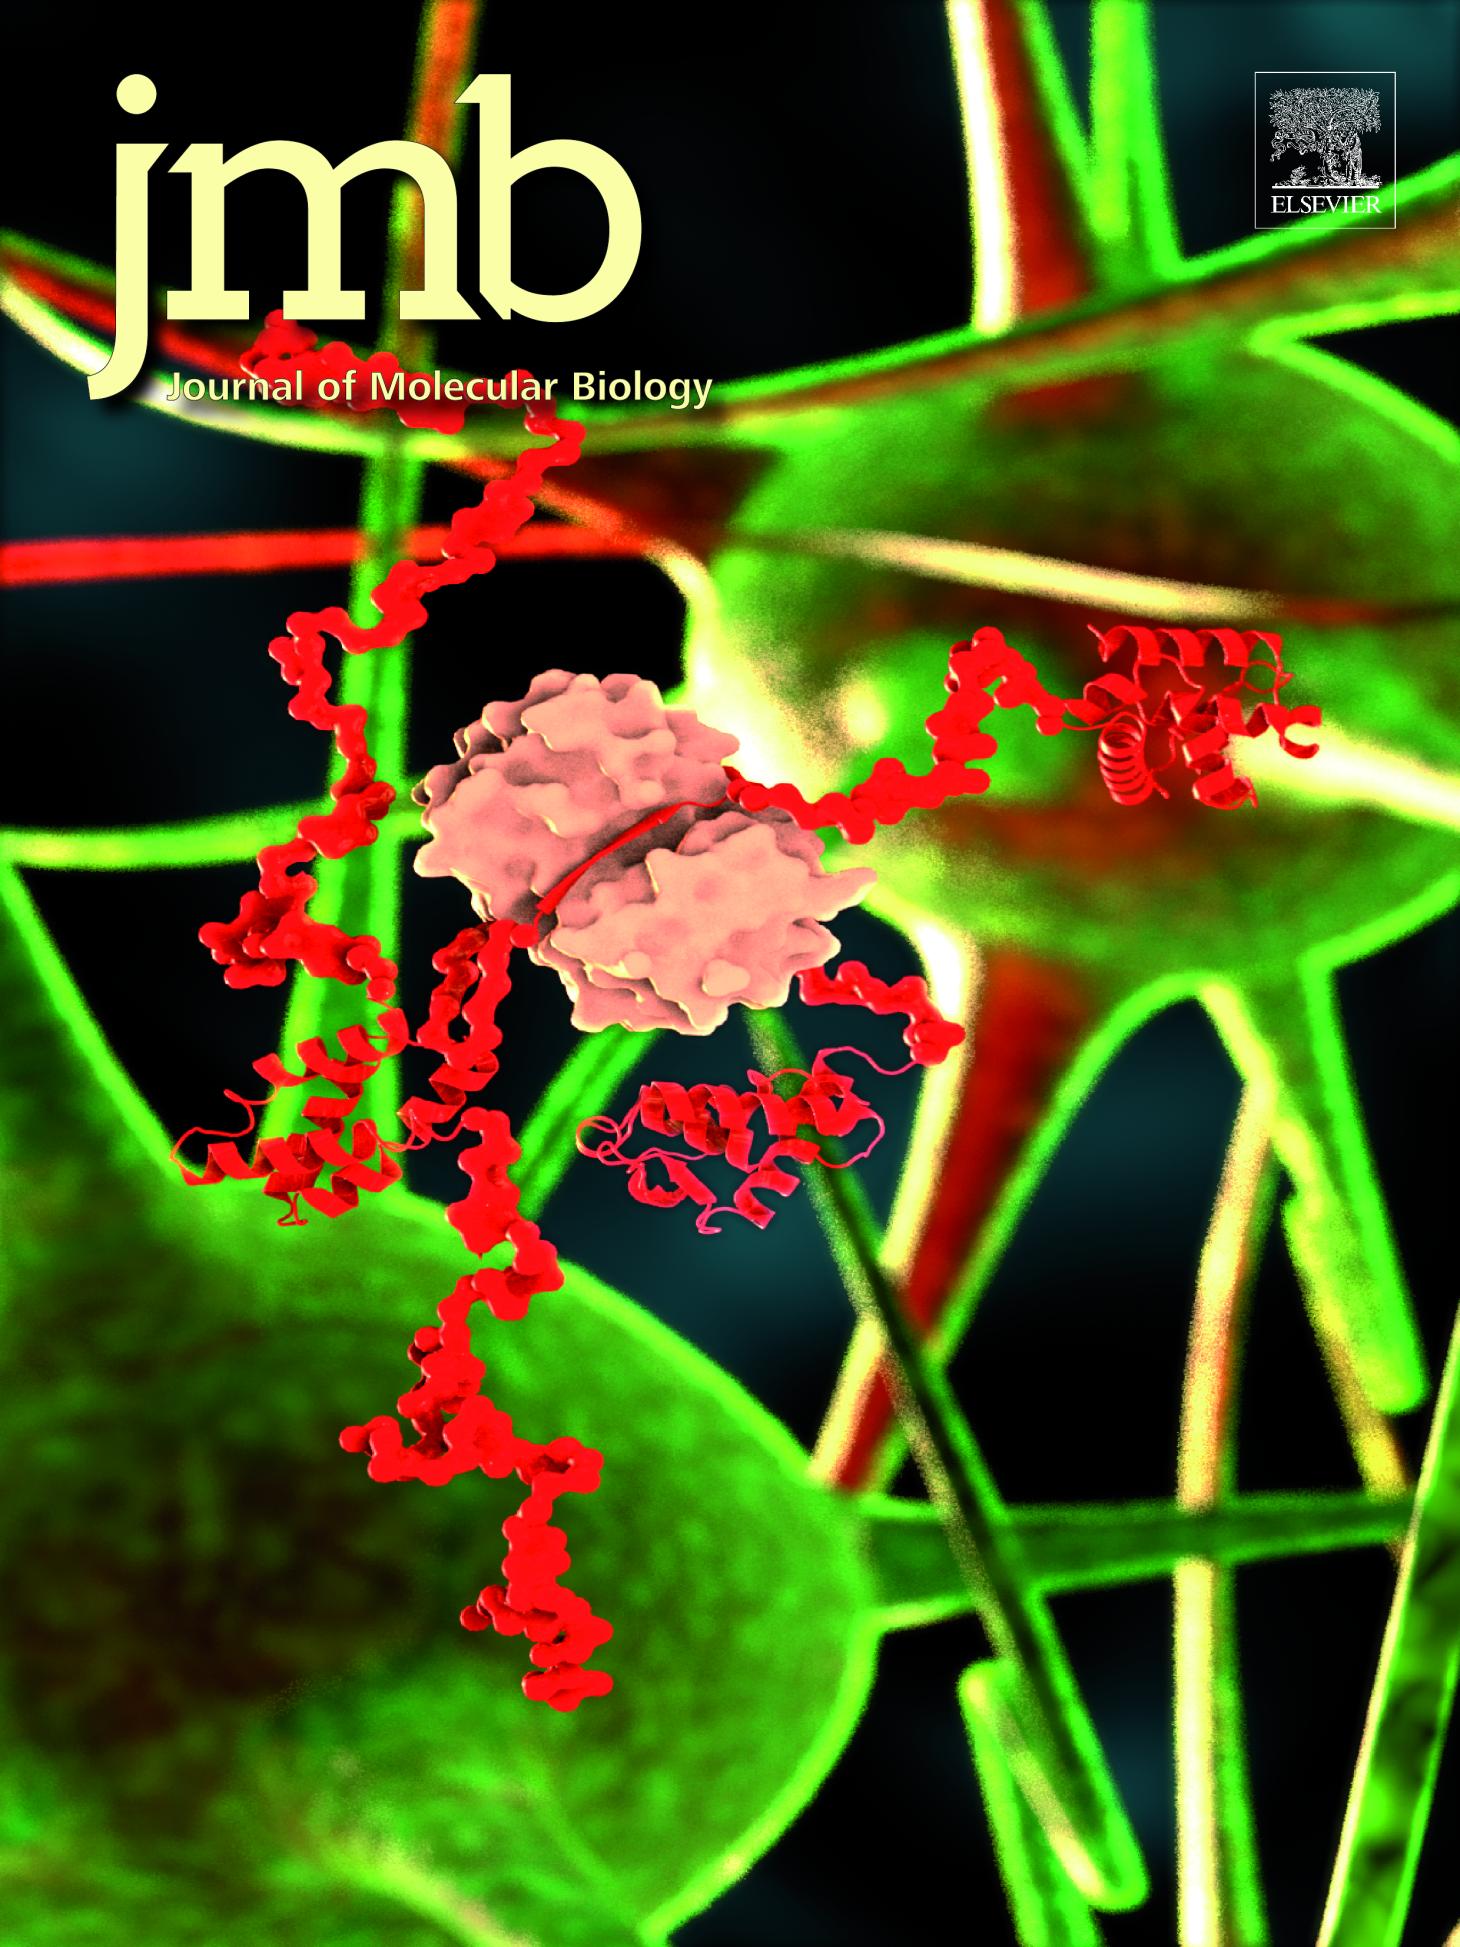 Cover of the Journal of Molecular Biology.